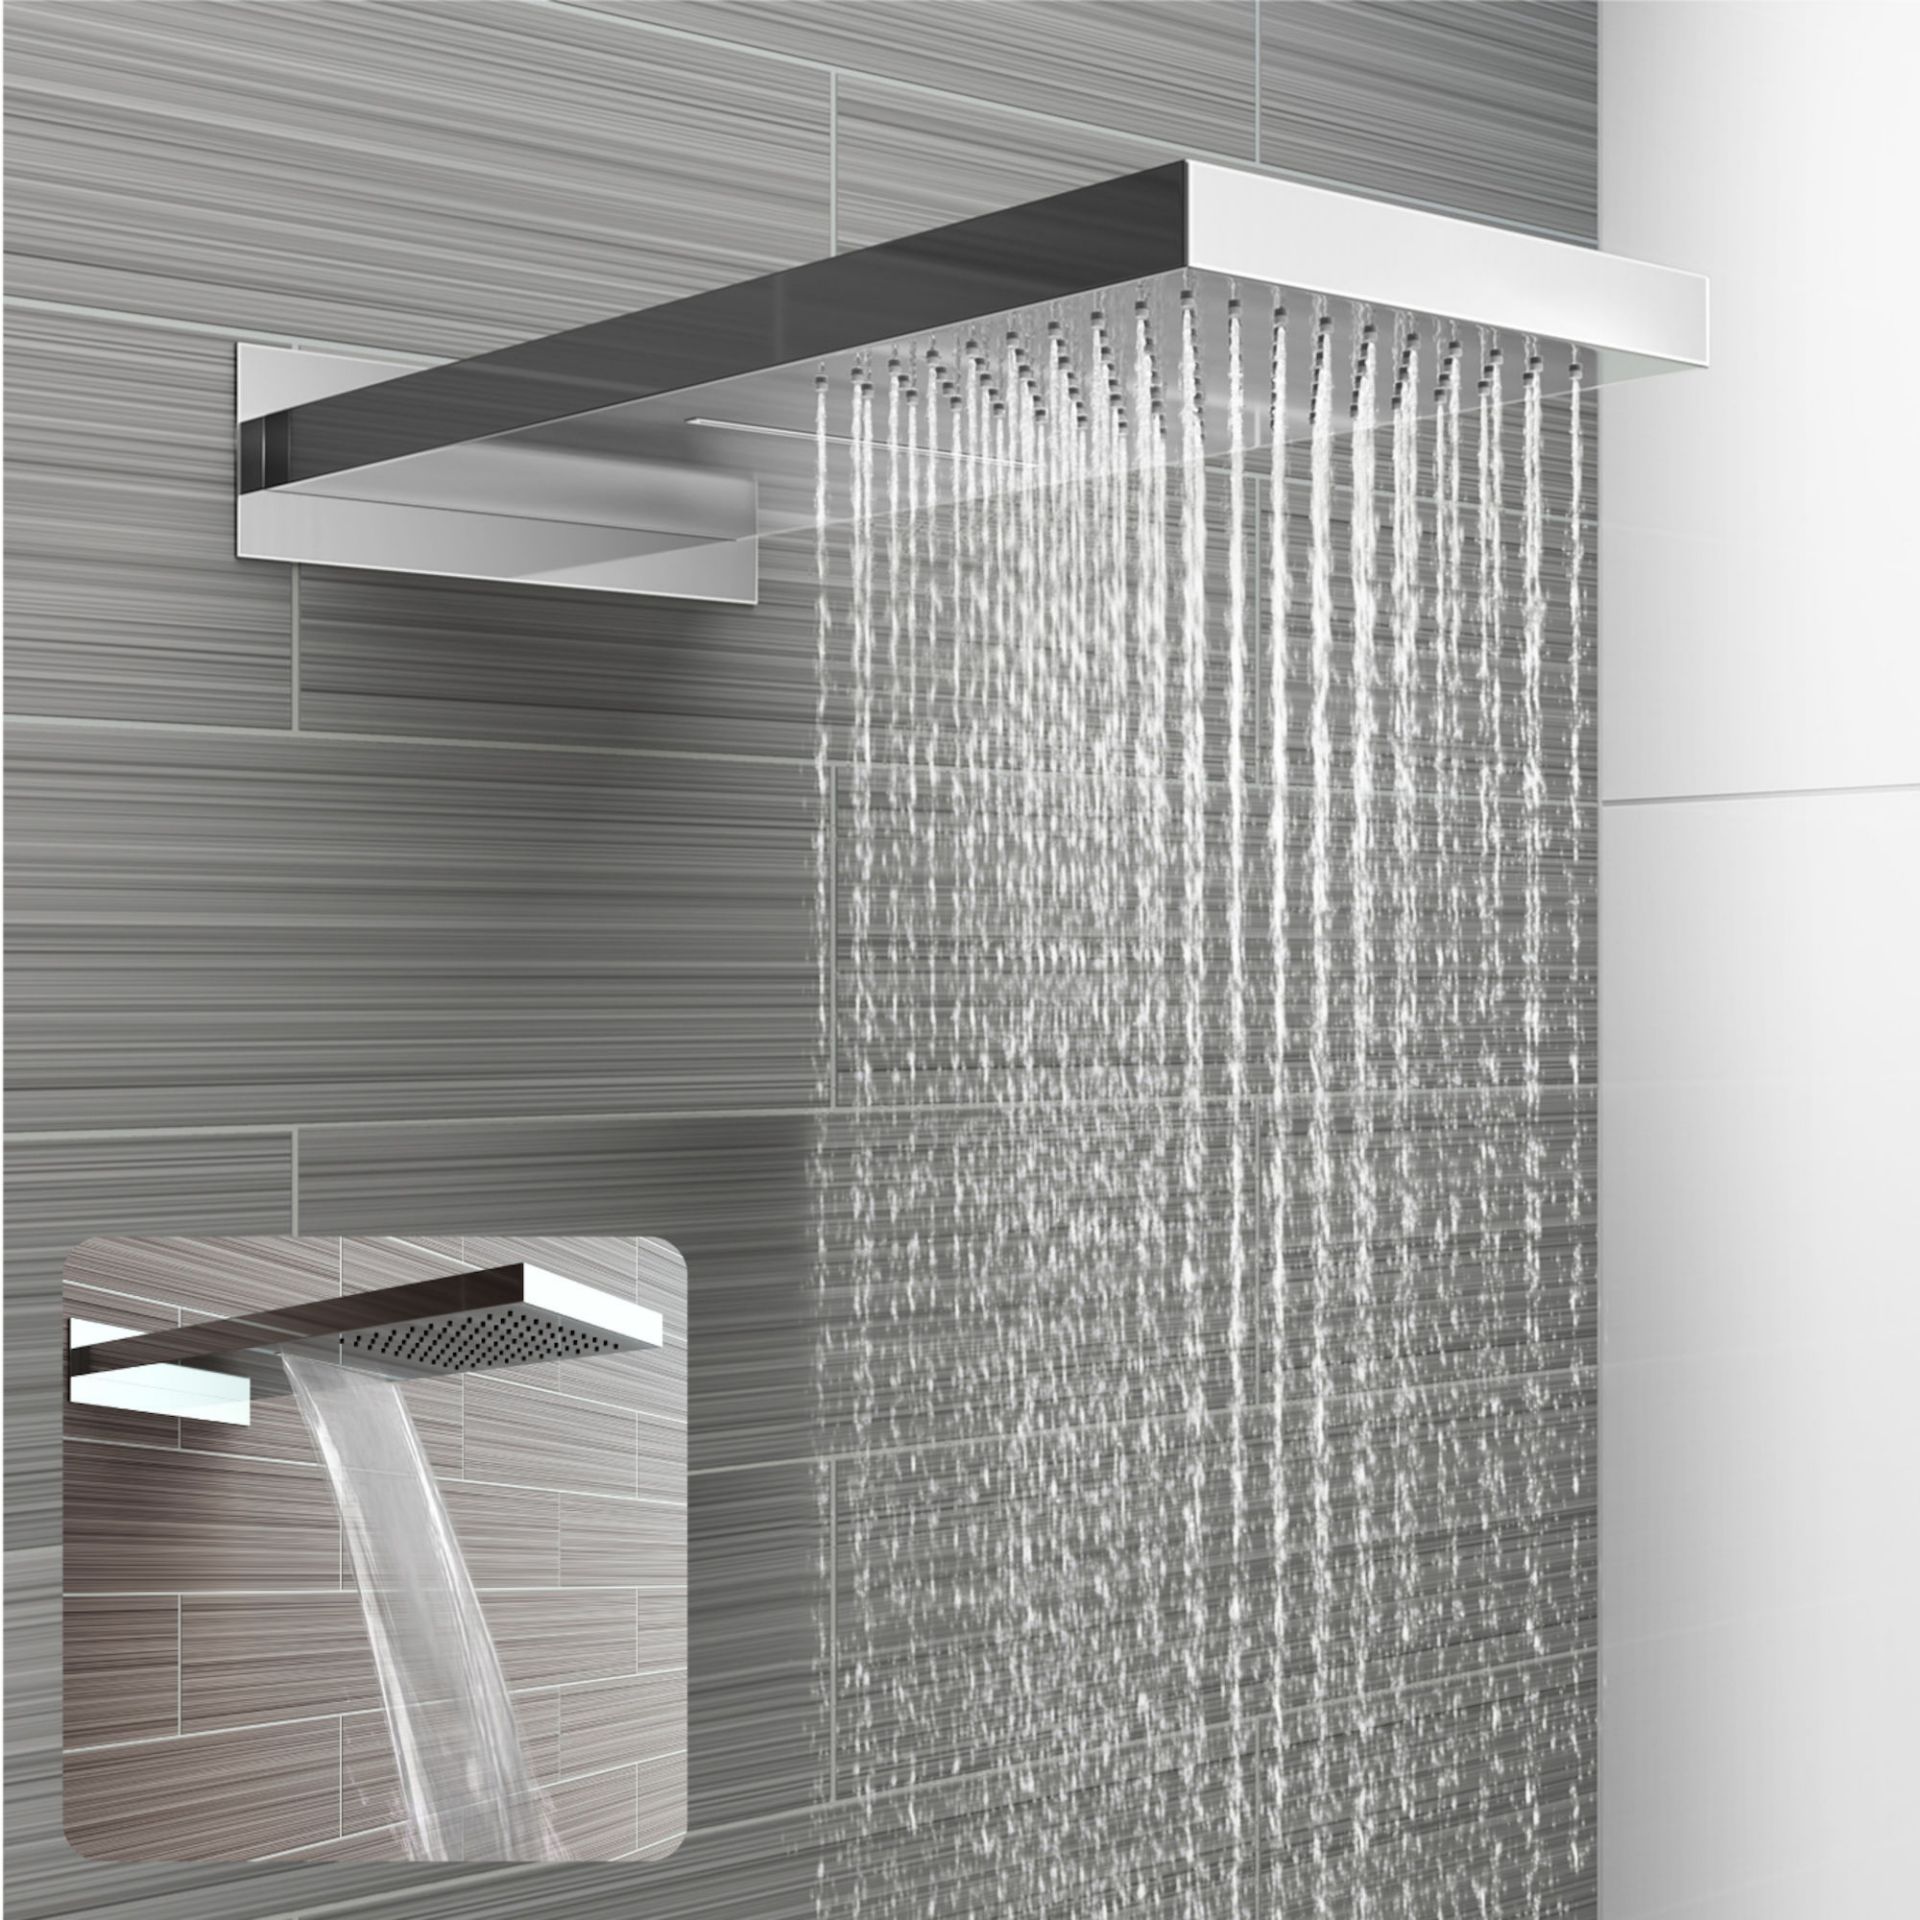 (YC32) Stainless Steel 230x500mm Waterfall Shower Head. RRP £374.98. Dual function waterfall and